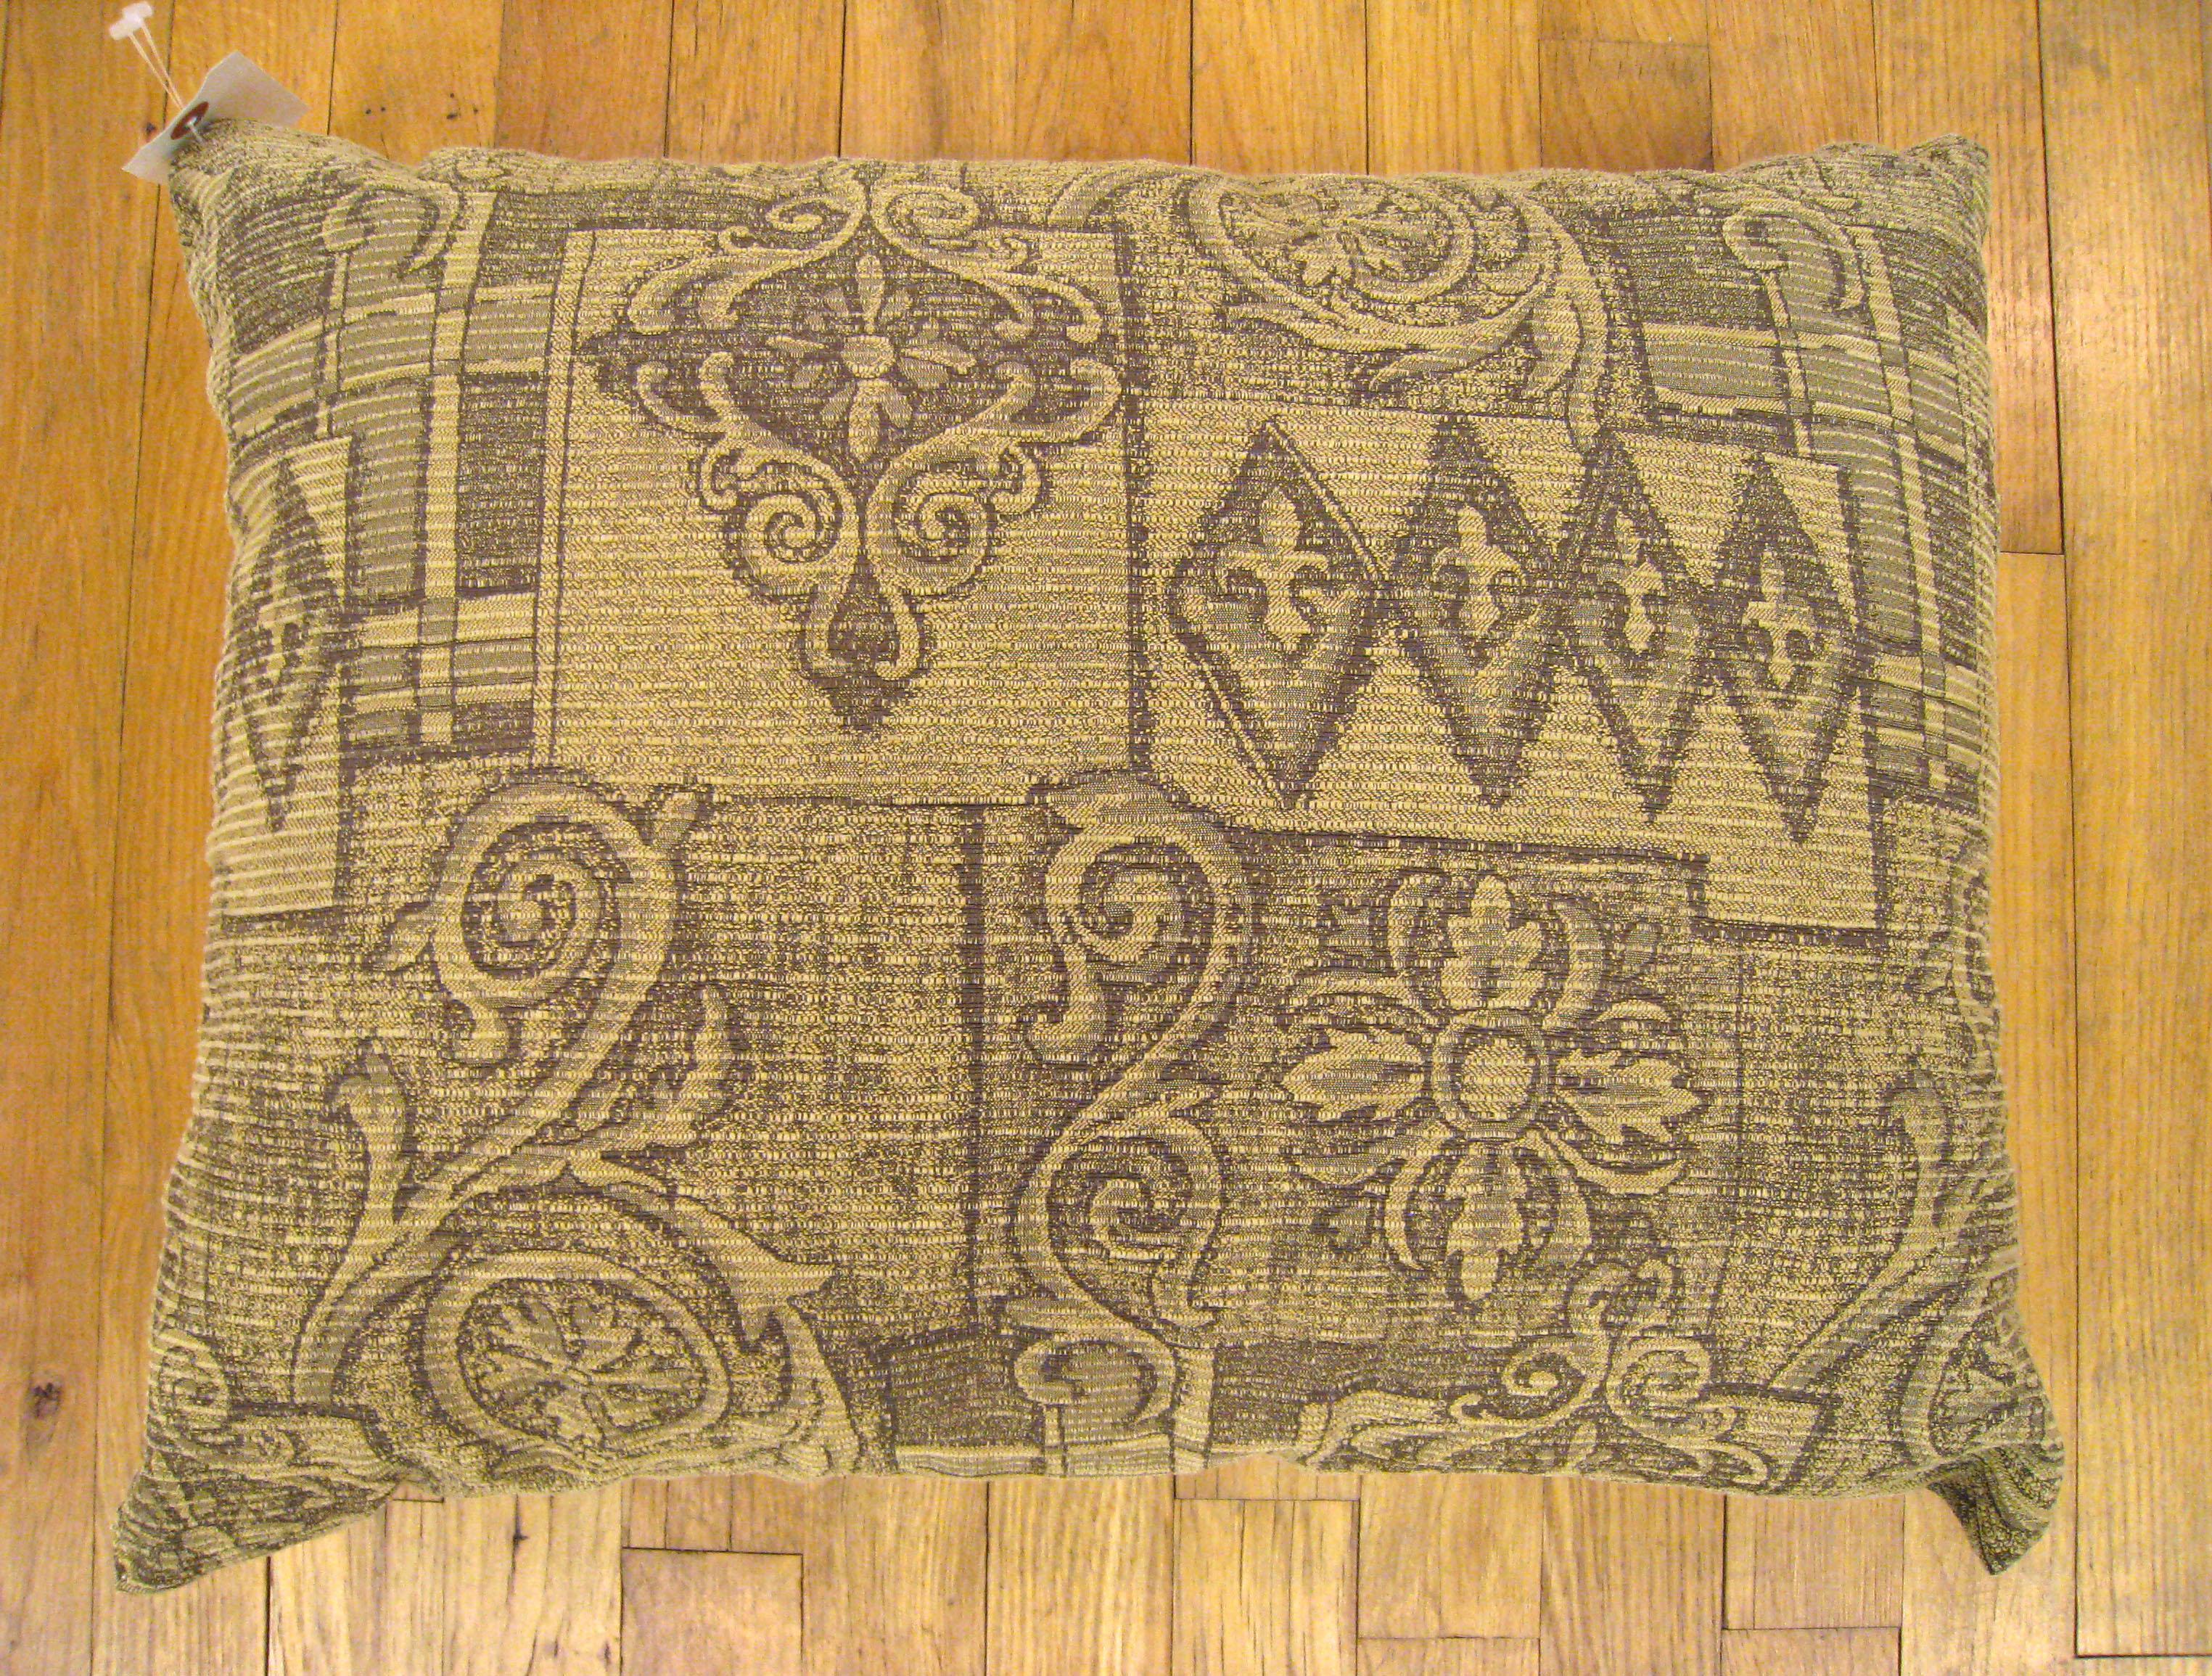 A vintage decorative pillow with floro-geometric design on both sides, size: 22